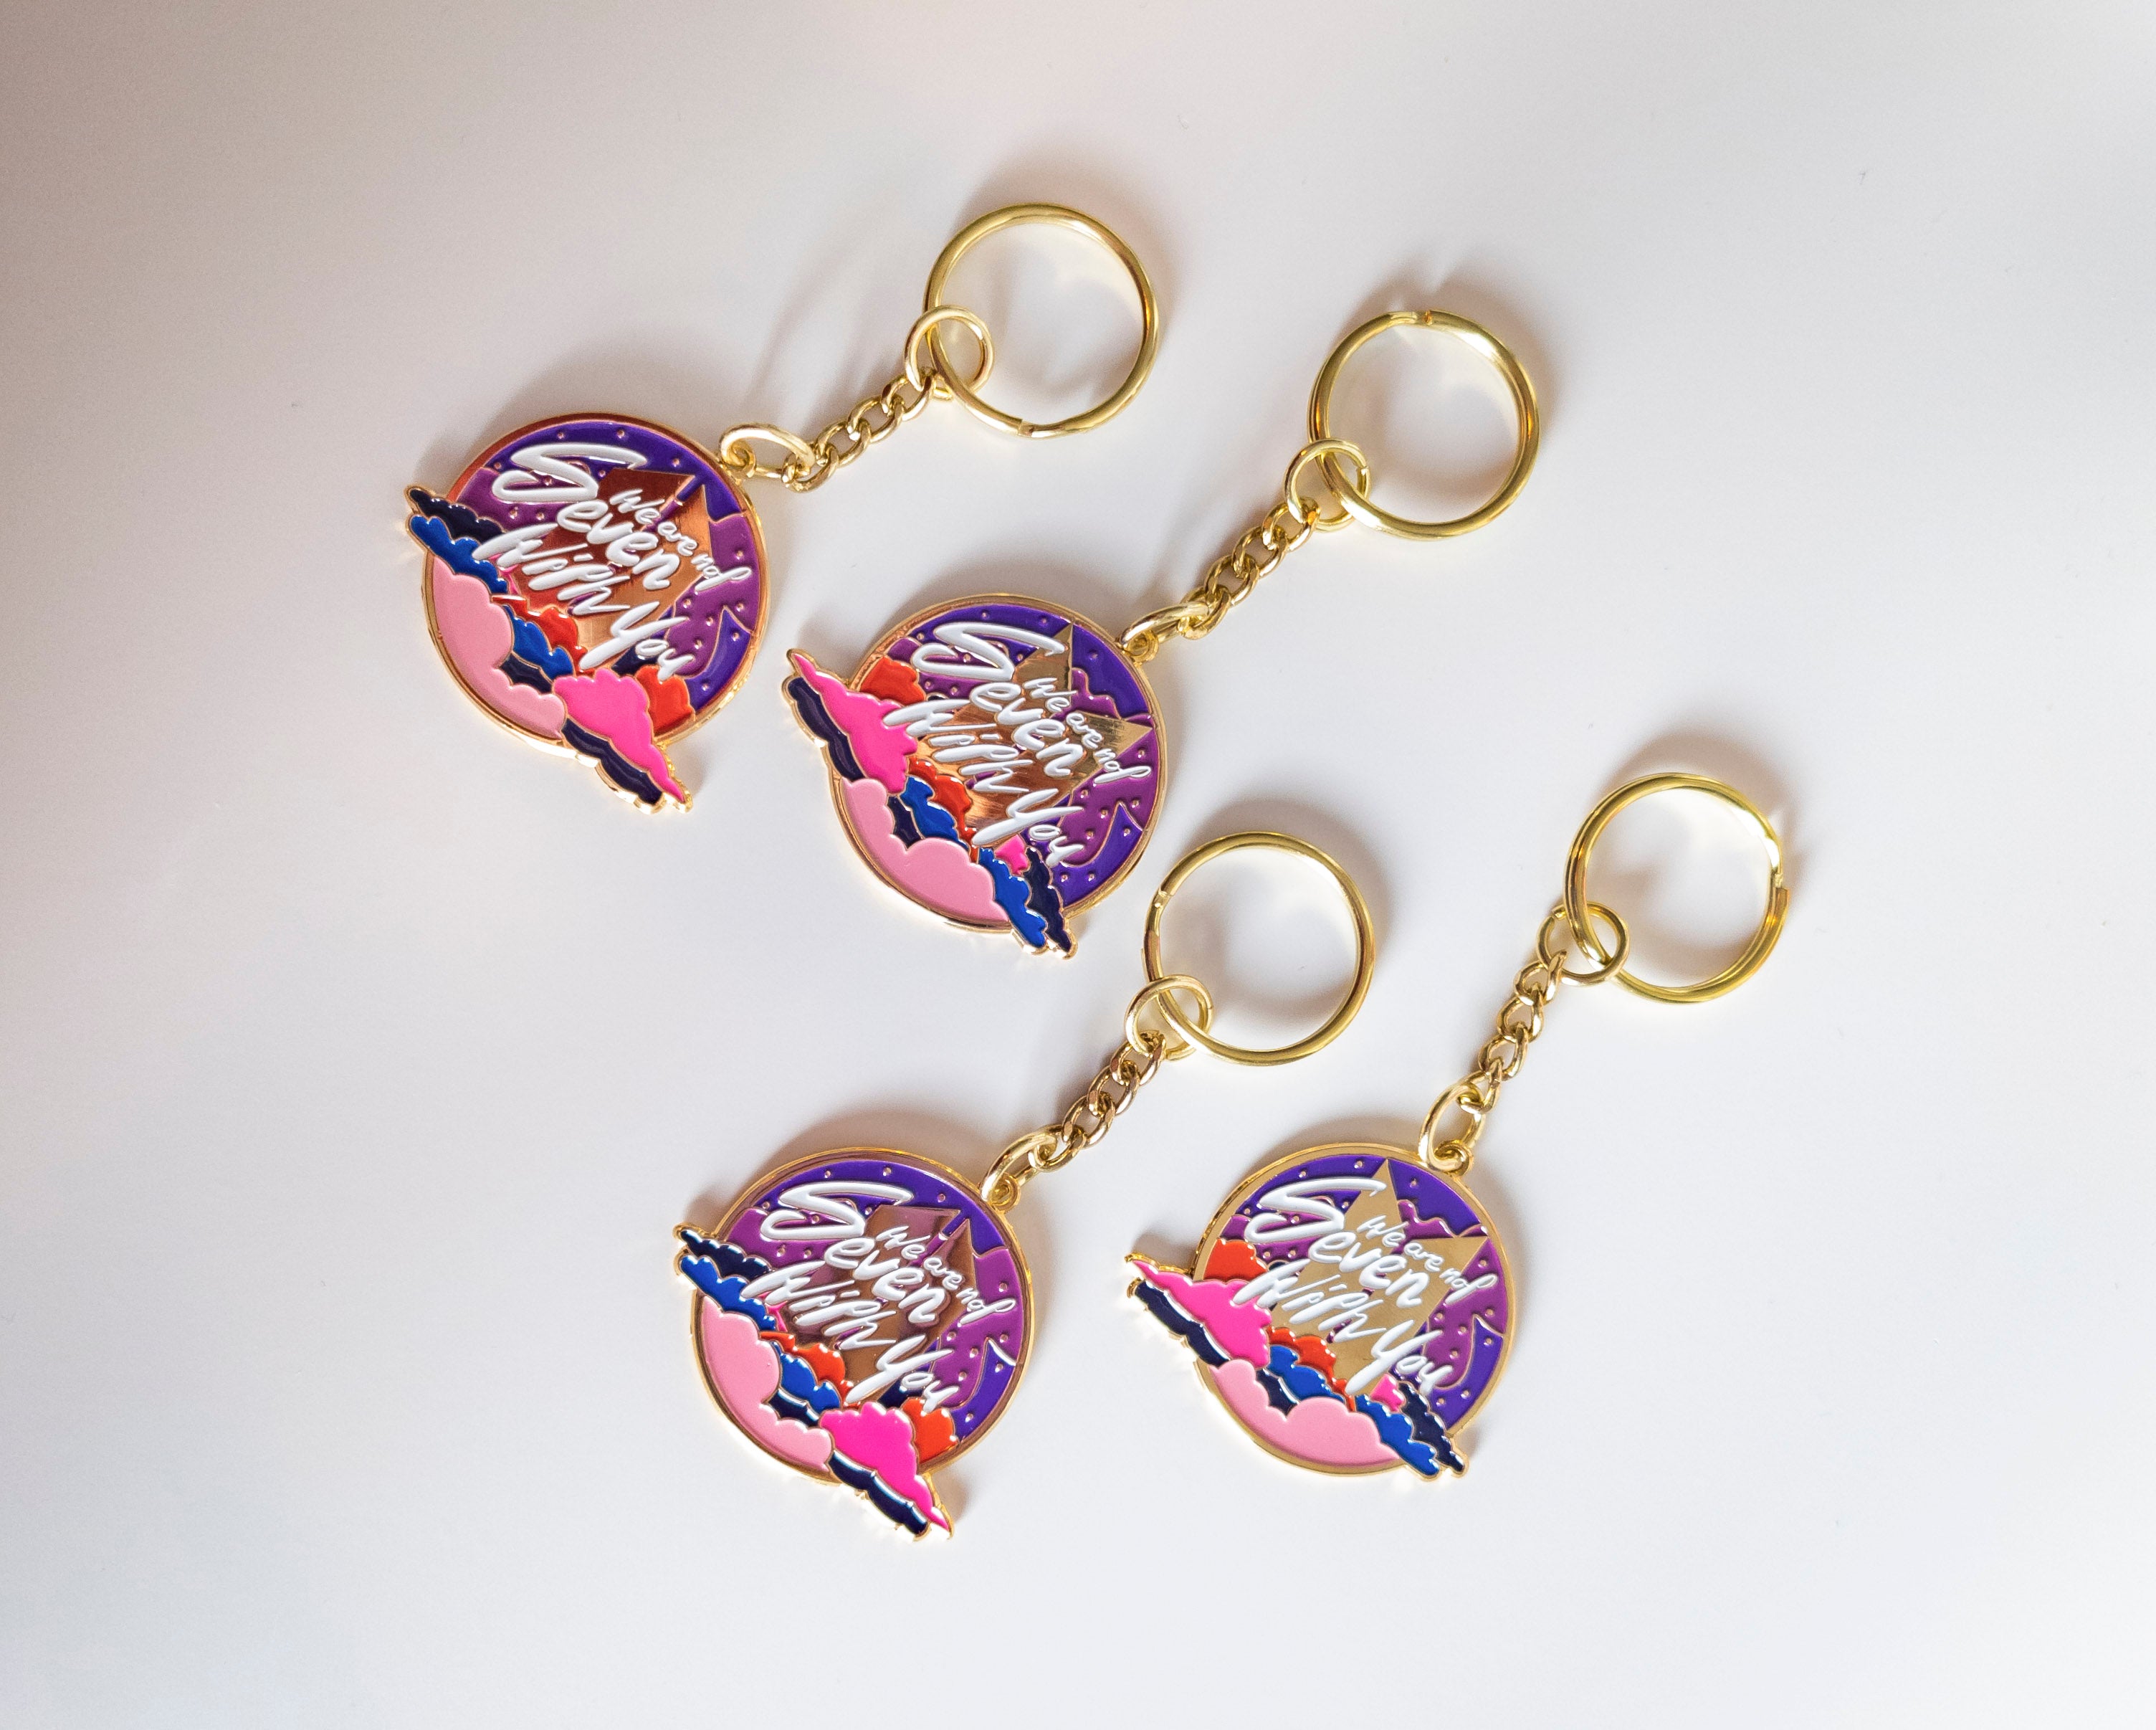 Mystery Box BTS Keychains and Pins!